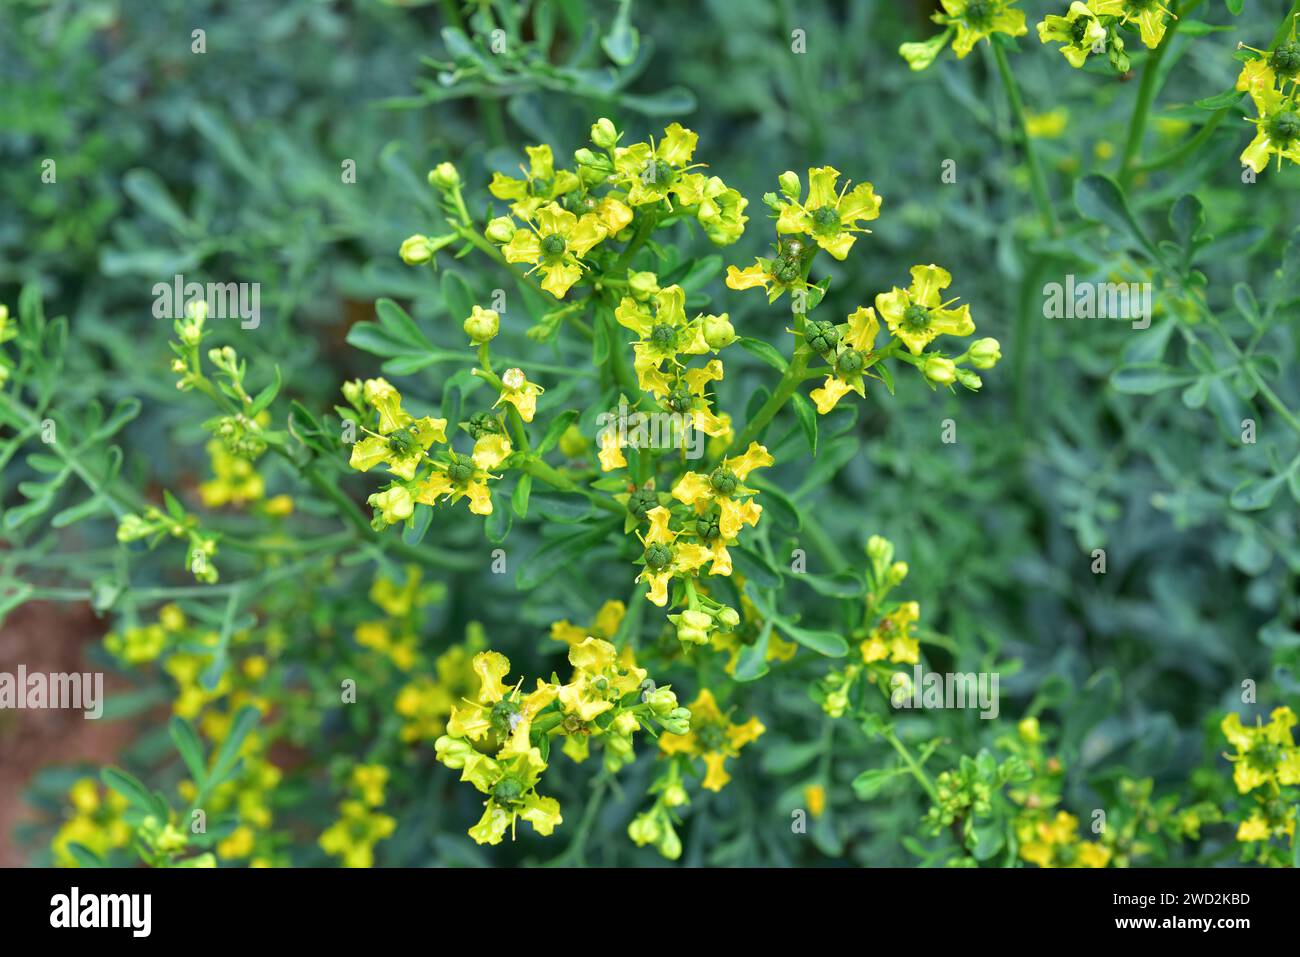 Common rue (Ruta graveolens) is a medicinal and toxic perennial herb native to Balkan Peninsula. Flowers and fruits detail. Stock Photo